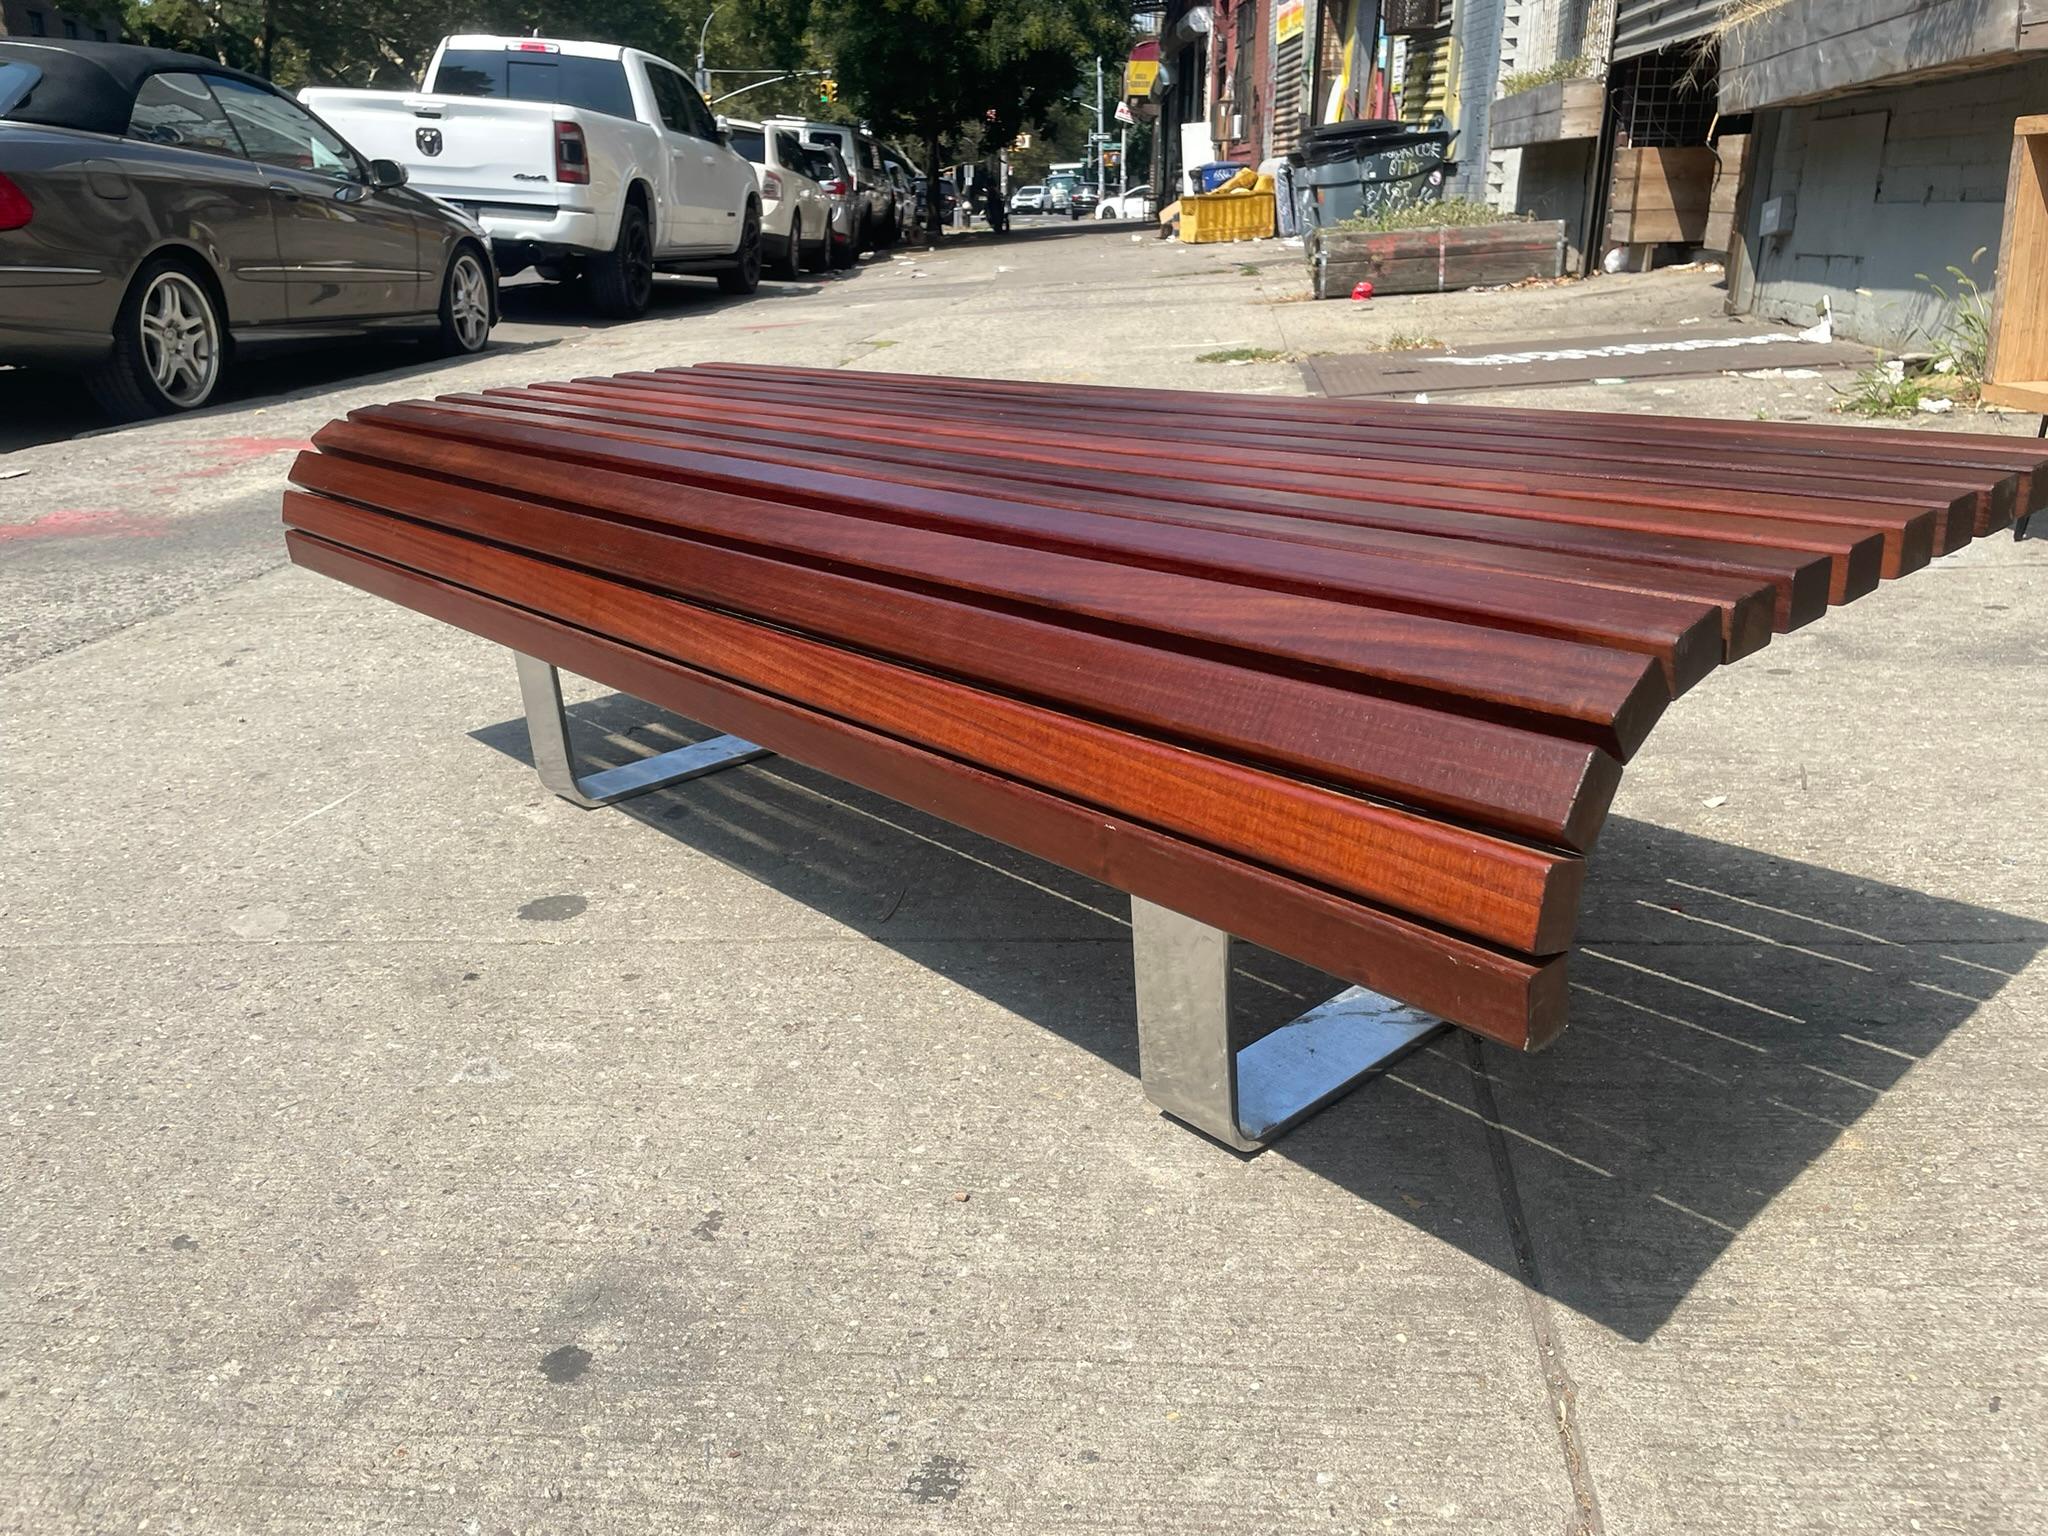 Redwood Mid Century Modern Wood Slat Coffee Table / Bench In Good Condition For Sale In Brooklyn, NY